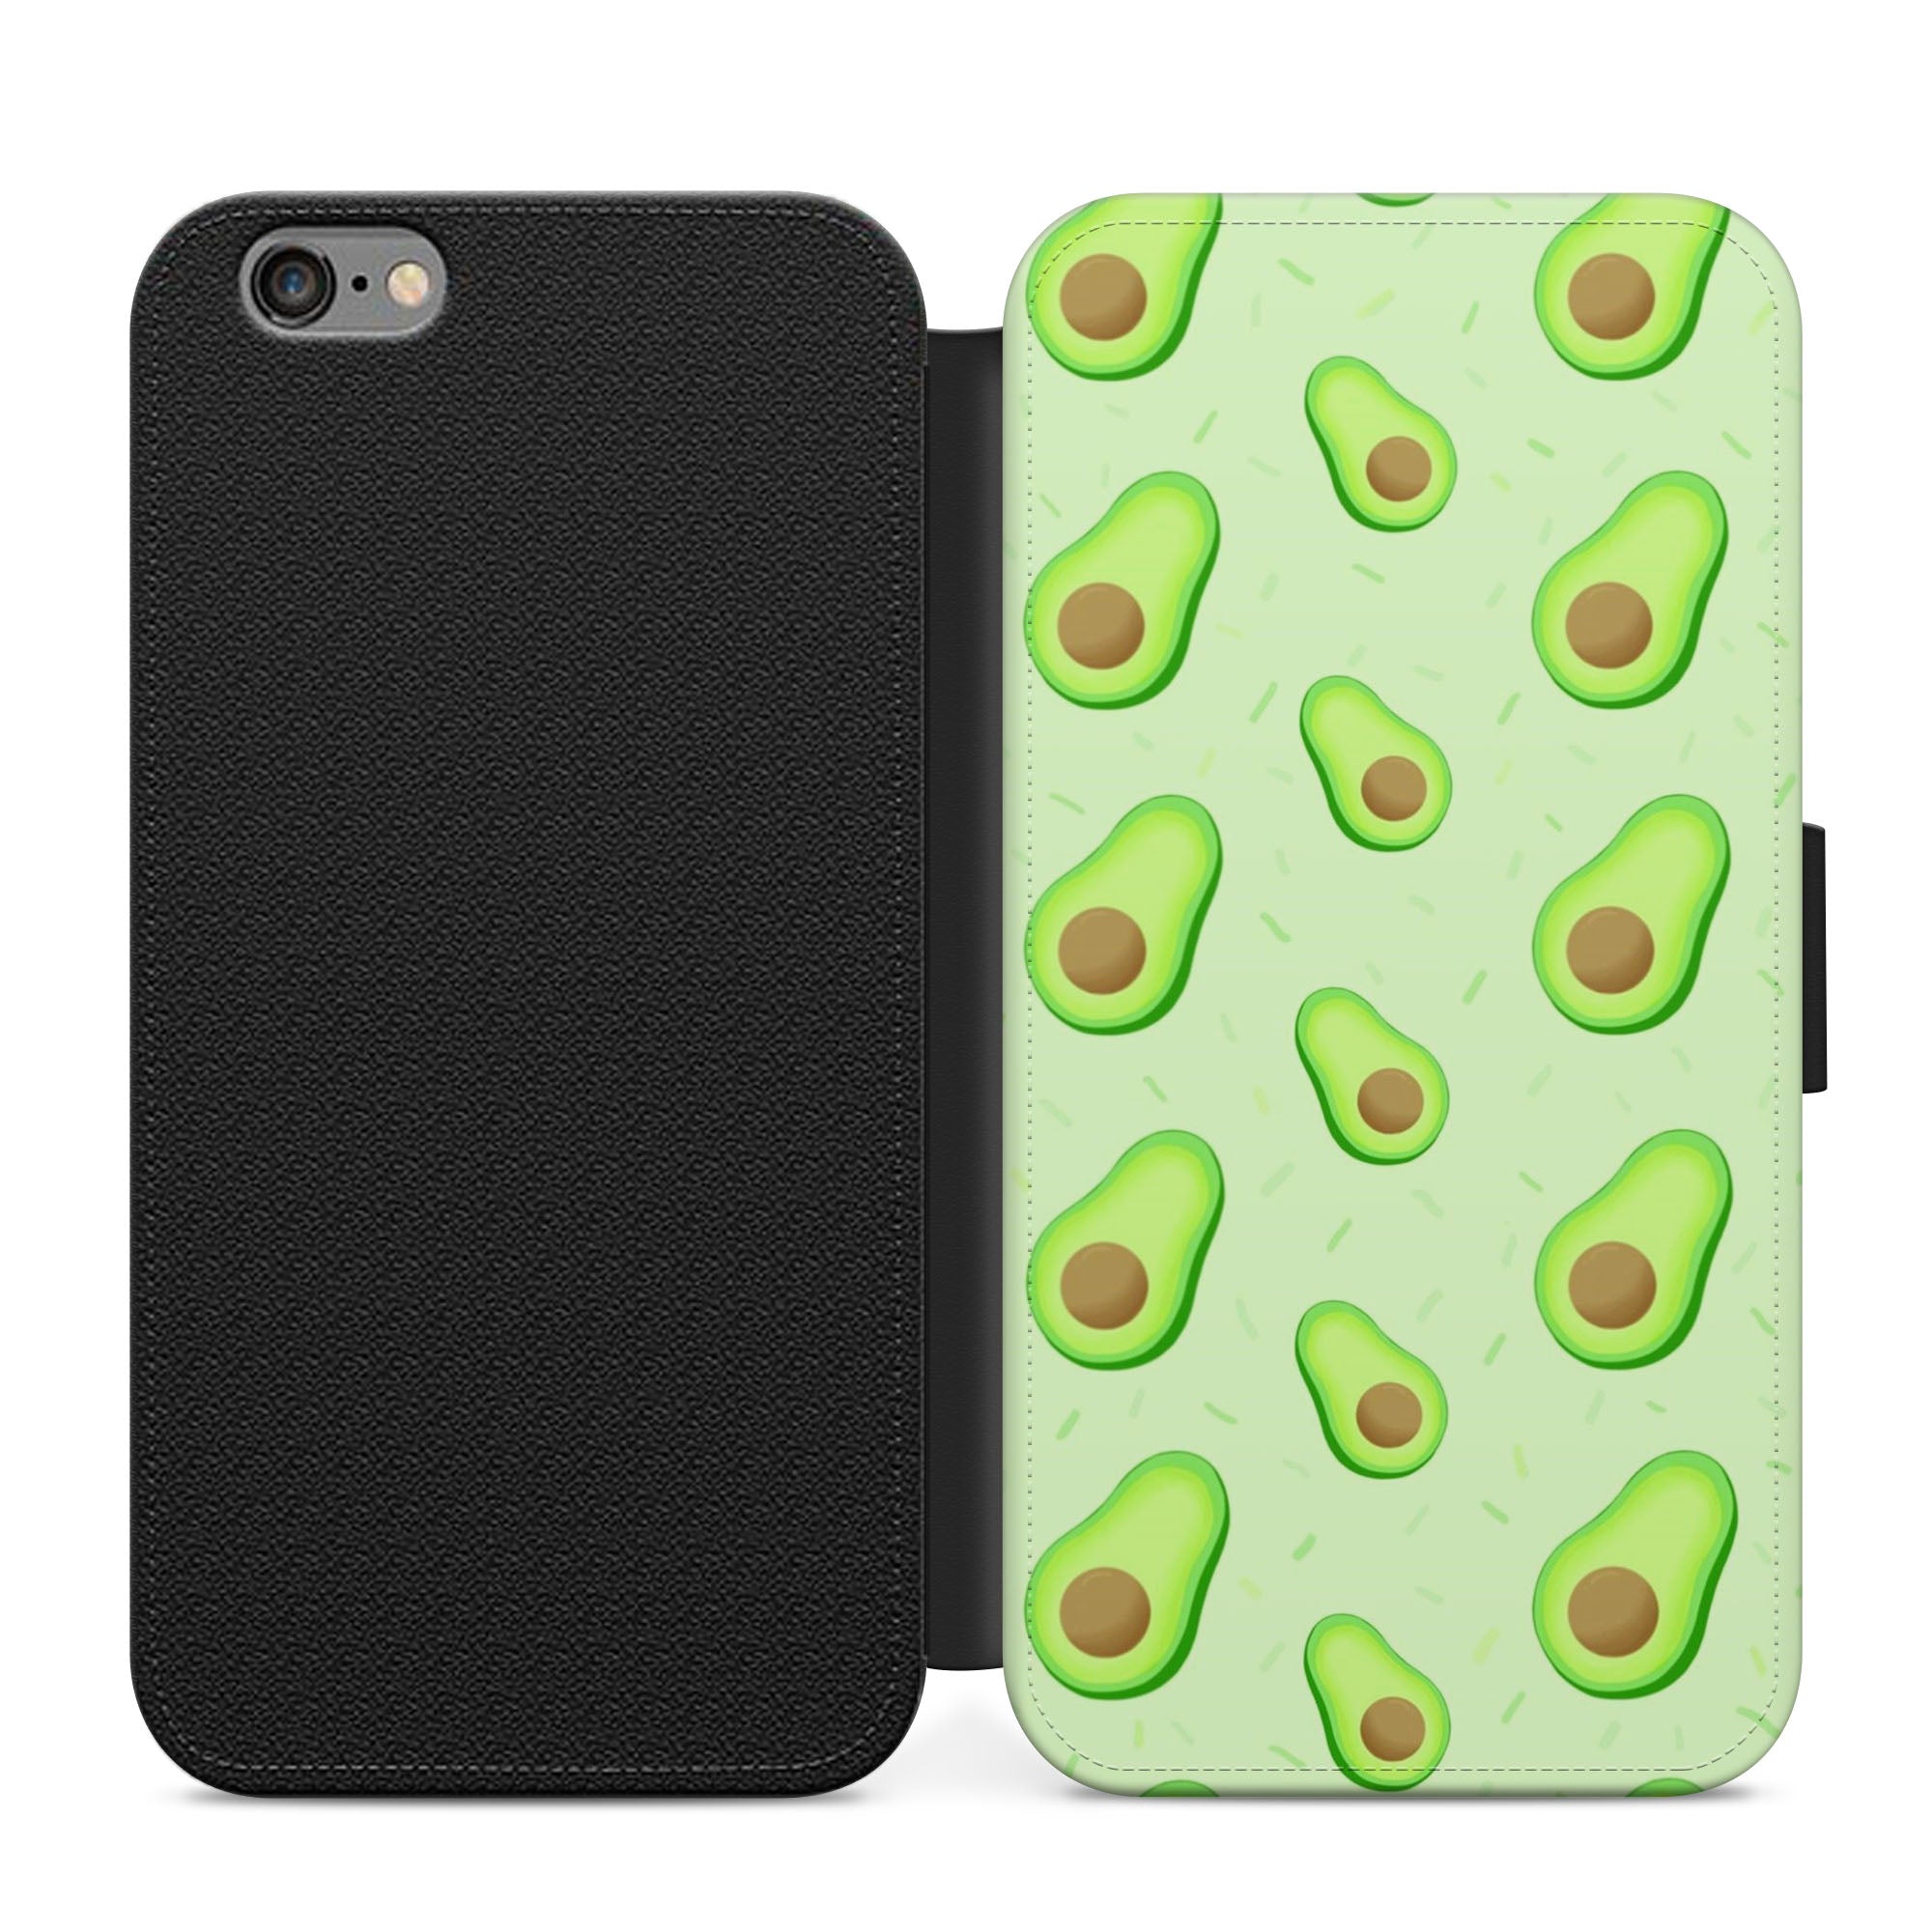 Avocado Cute Faux Leather Flip Case Wallet for iPhone / Samsung